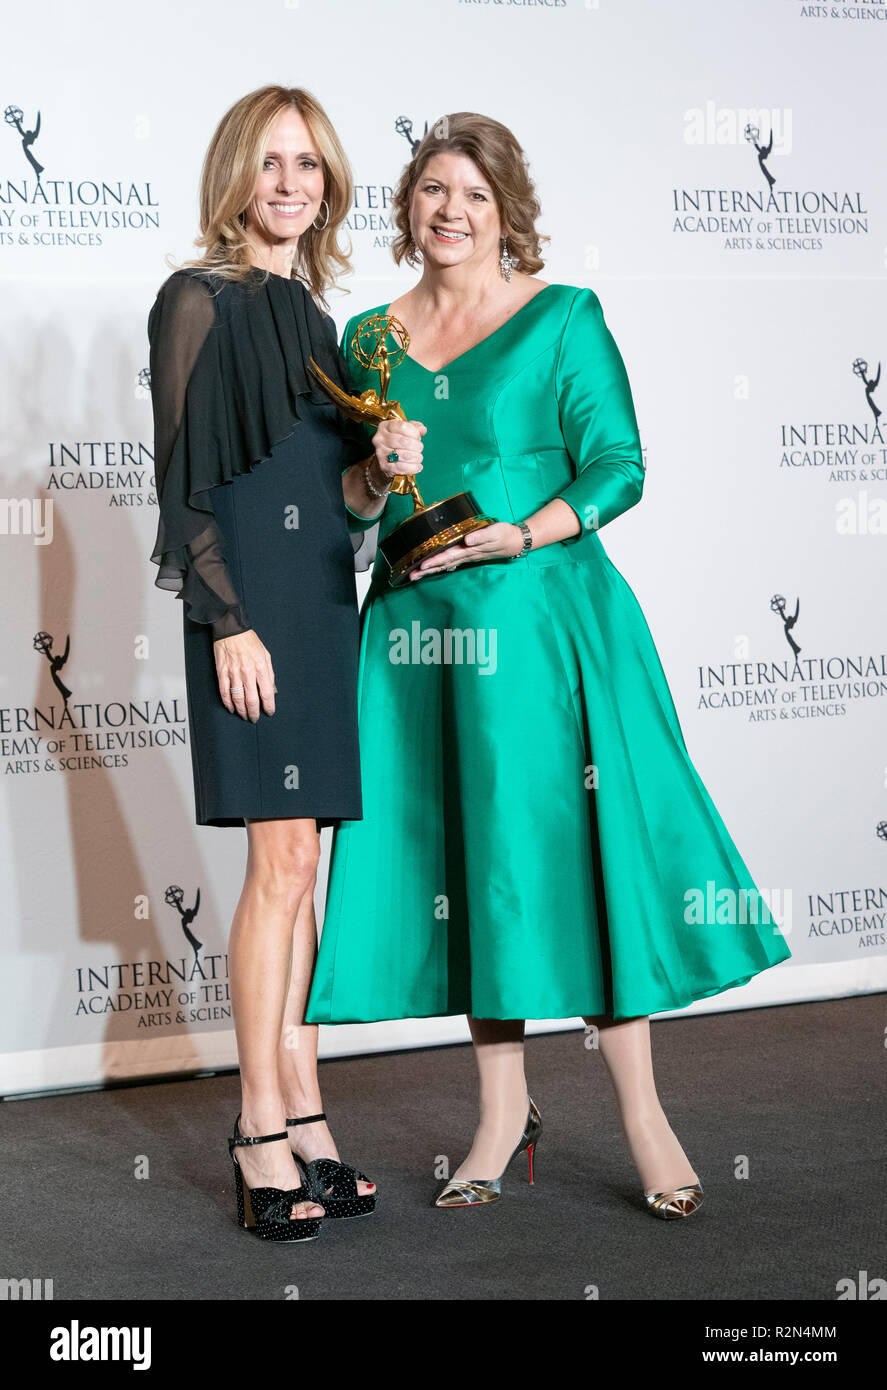 New York, United States. 19th Nov, 2018. New York, NY - November 19, 2018: Sophie Turner Laing winner of the Directorate Award poses with Dana Walden during the 46th International Emmy Awards at Hilton hotel Credit: lev radin/Alamy Live News Stock Photo